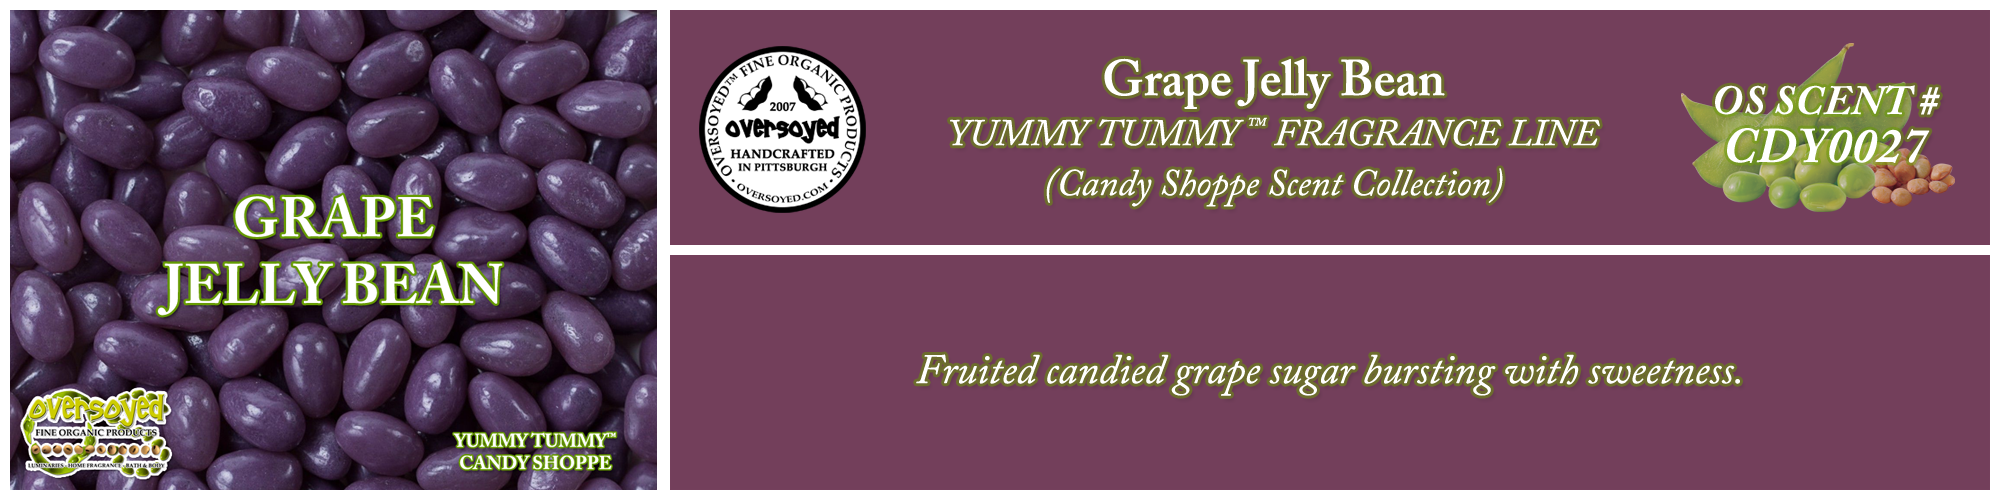 Grape Jelly Bean Handcrafted Products Collection